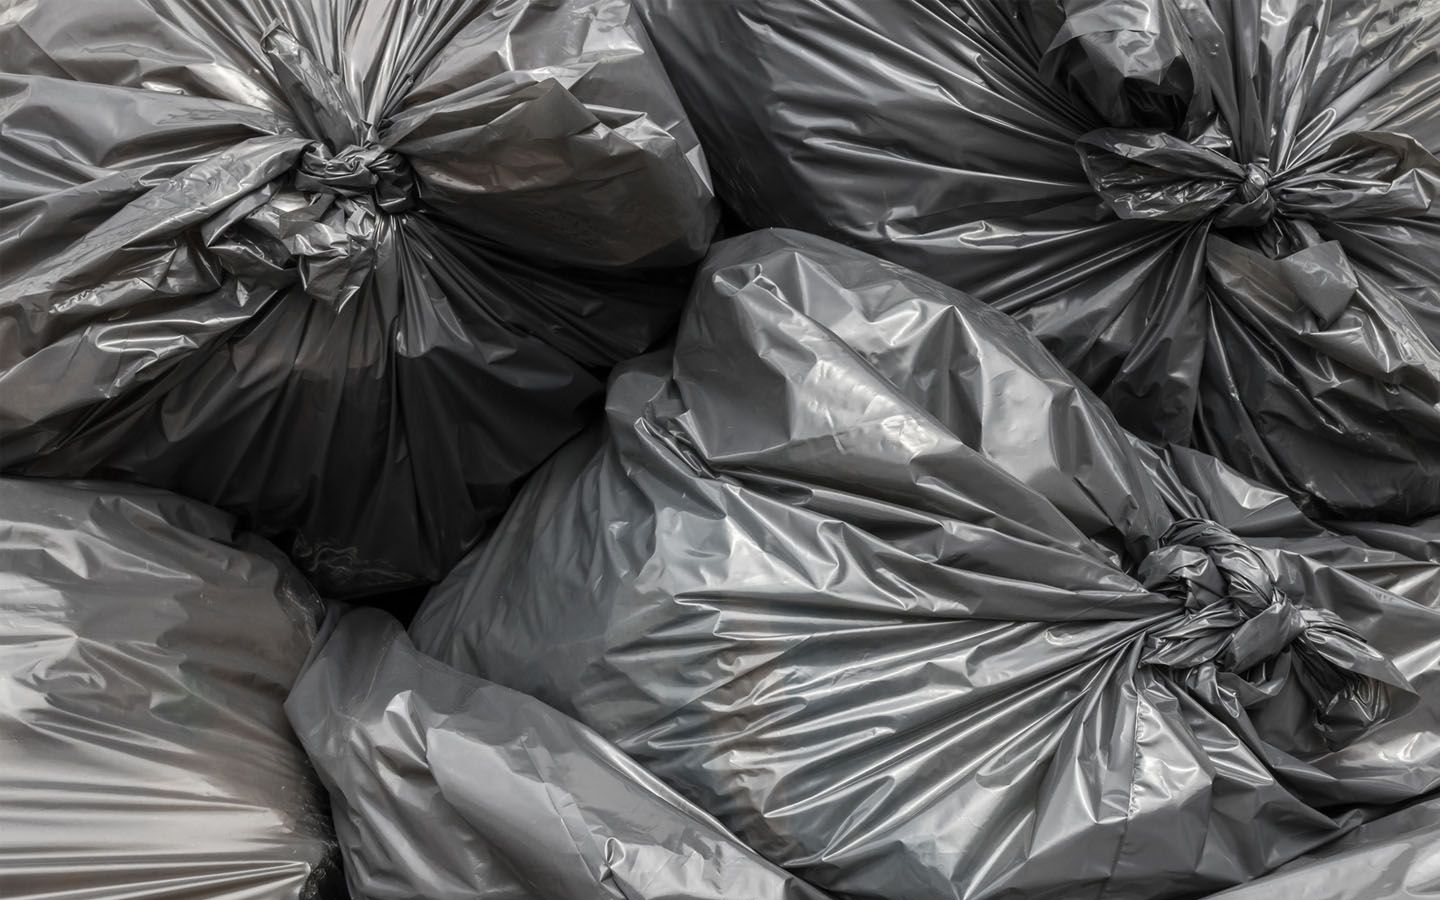 A pile of gray garbage bags are stacked on top of each other.